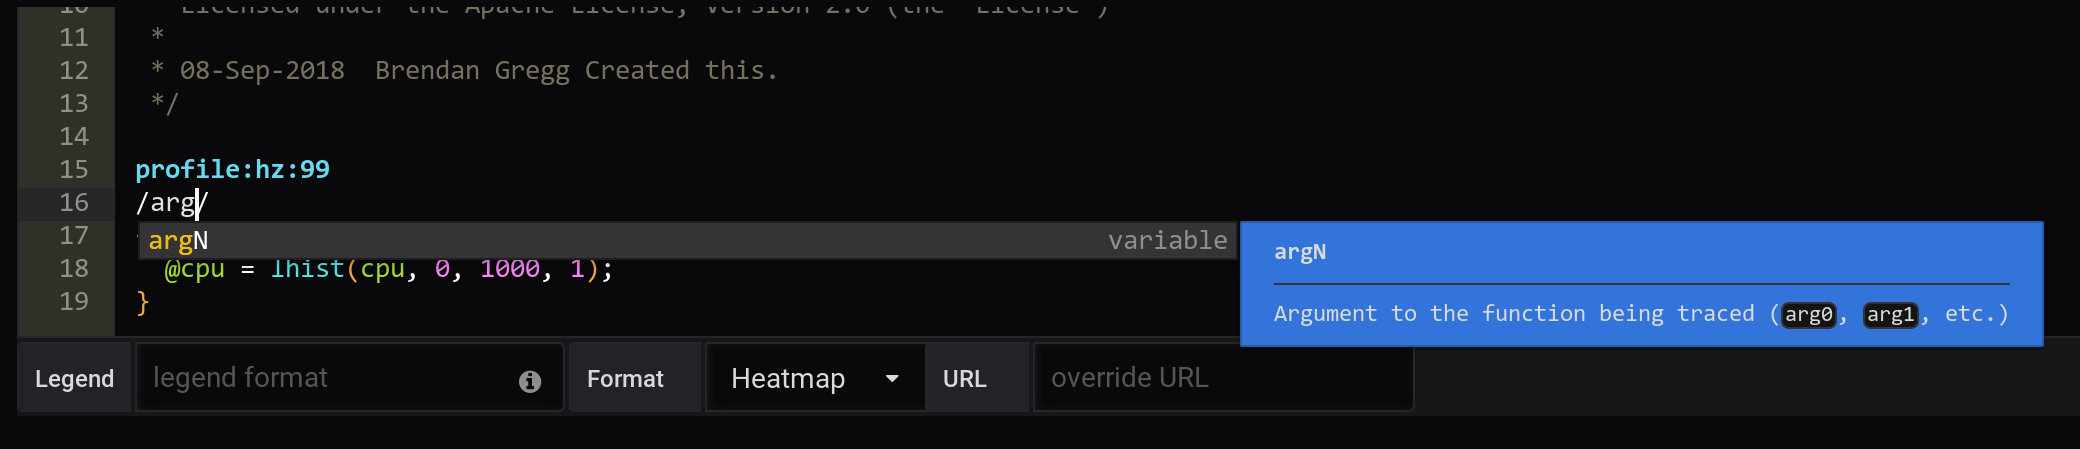 _images/bpftrace-variable-autocompletion.png